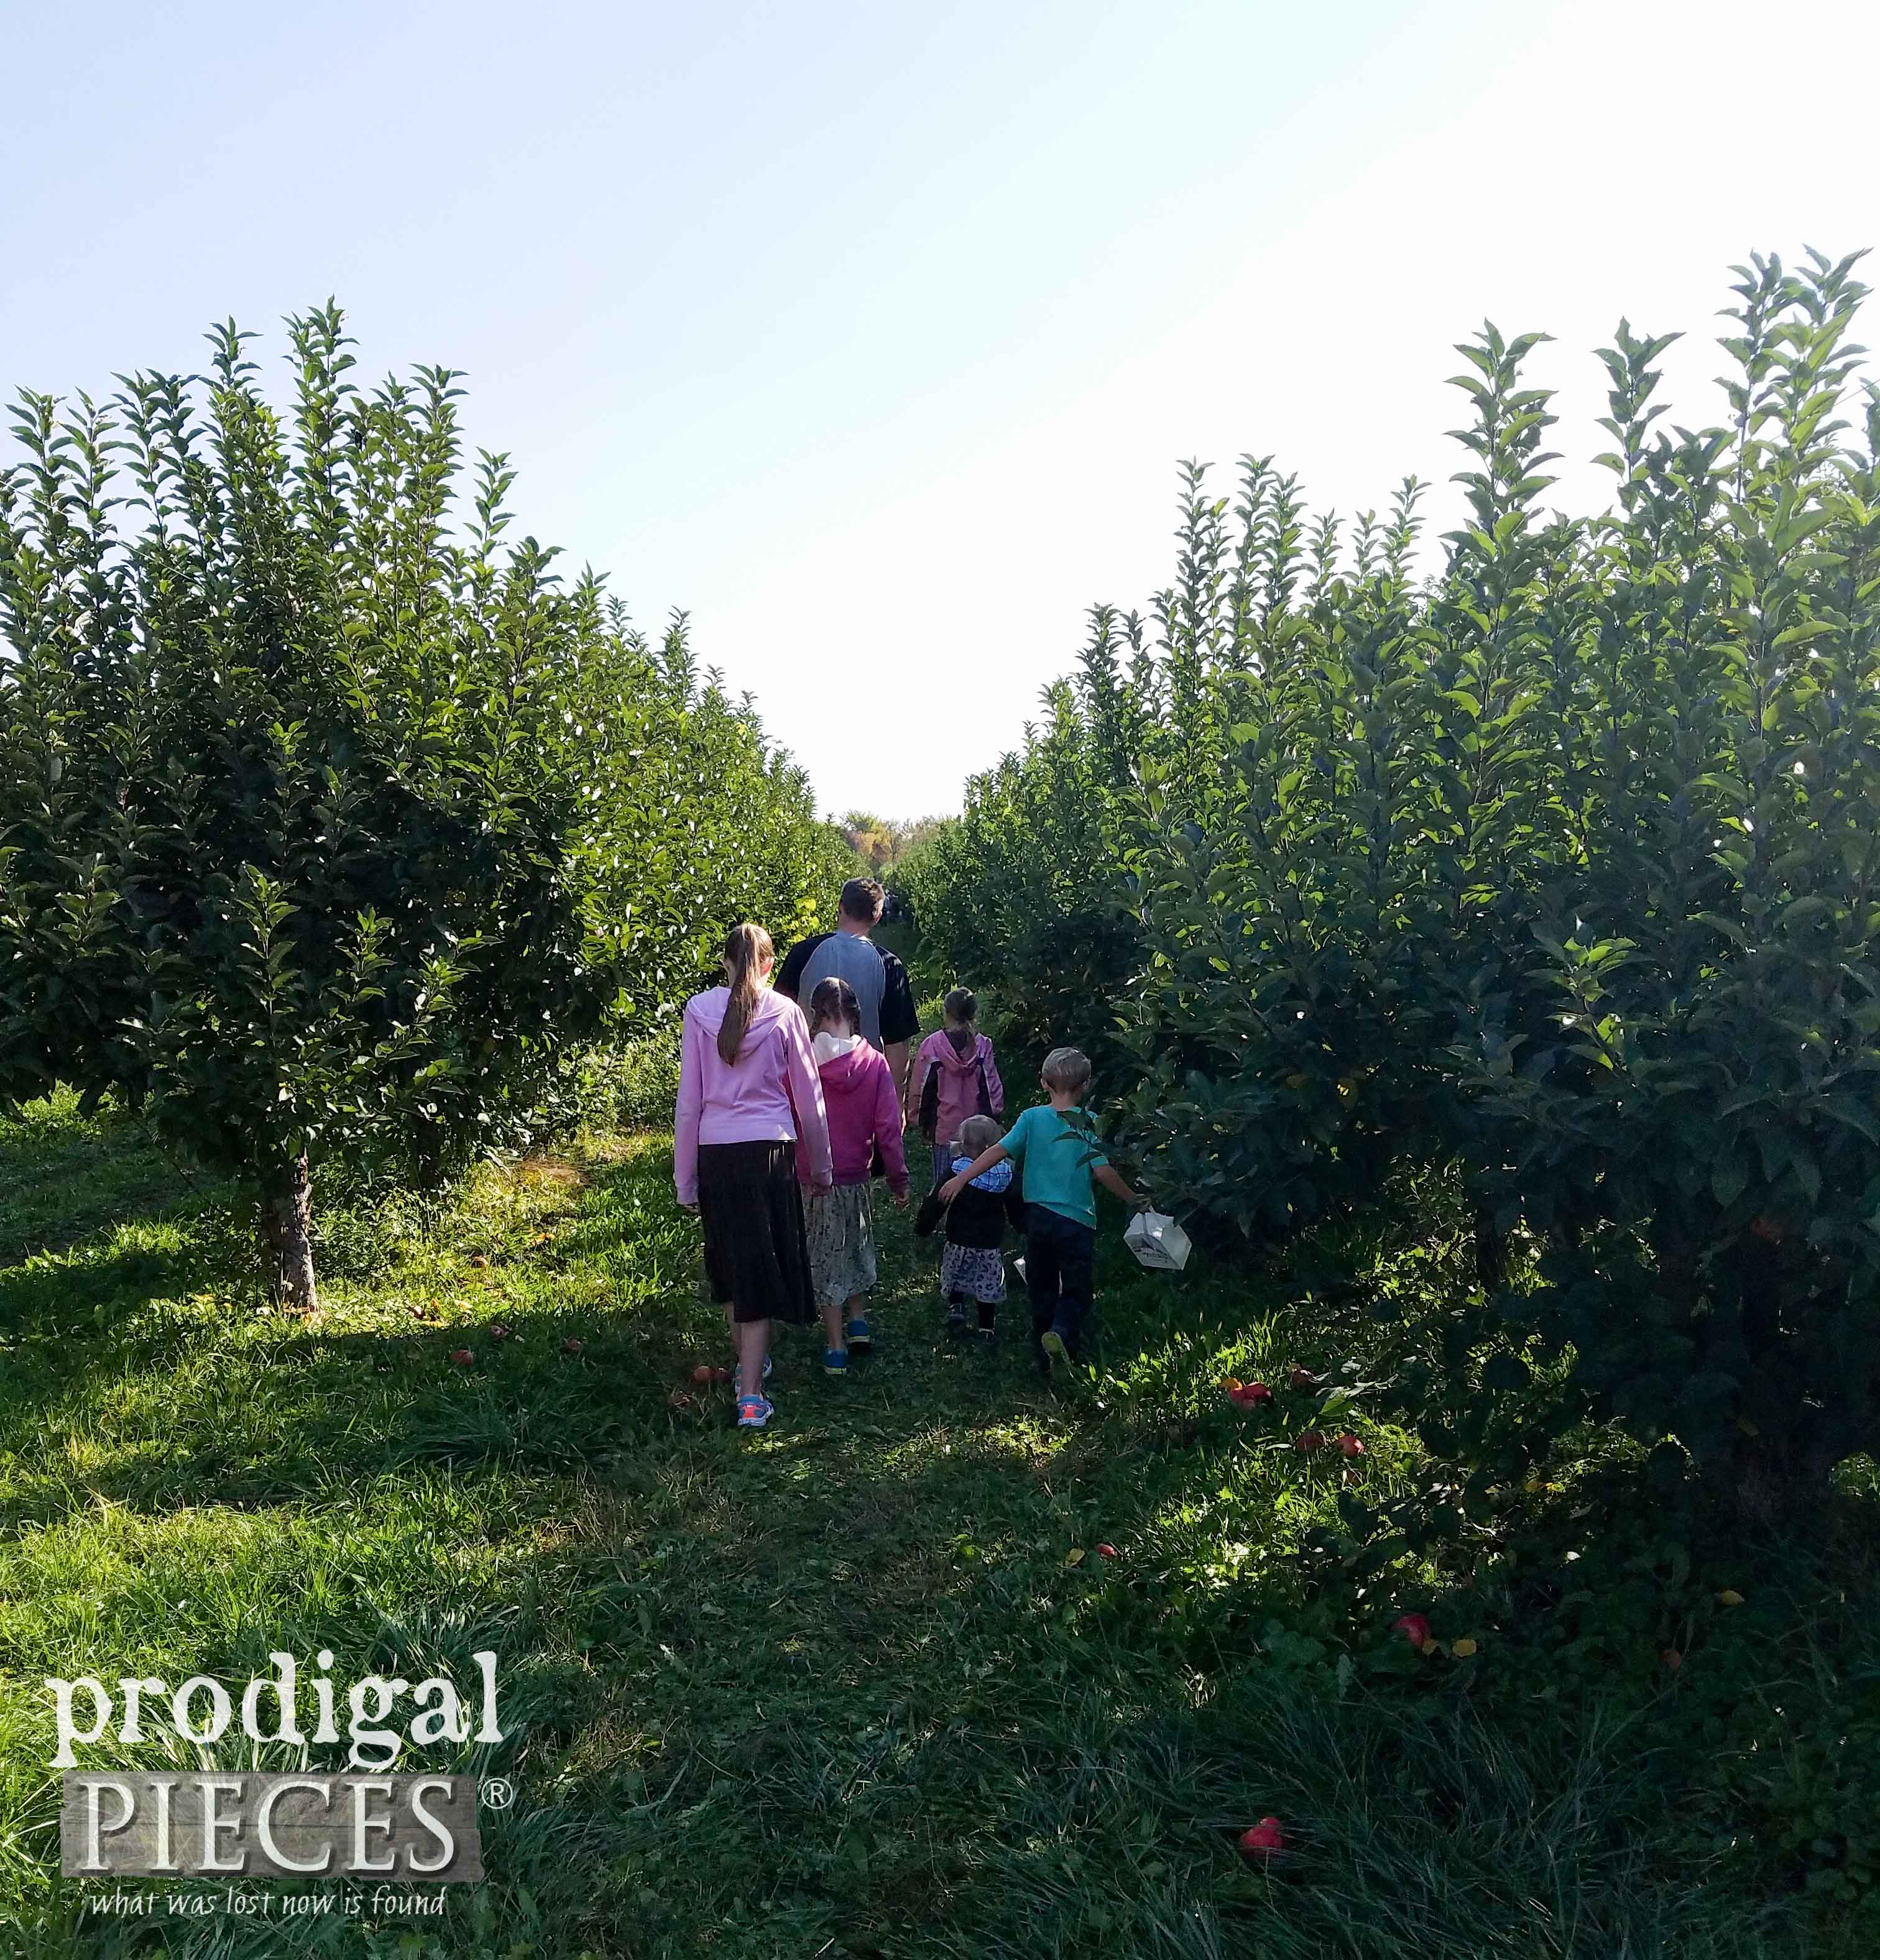 Family Picking Apples in Orchard | Soda Crate Stand by Prodigal Pieces | prodigalpieces.com